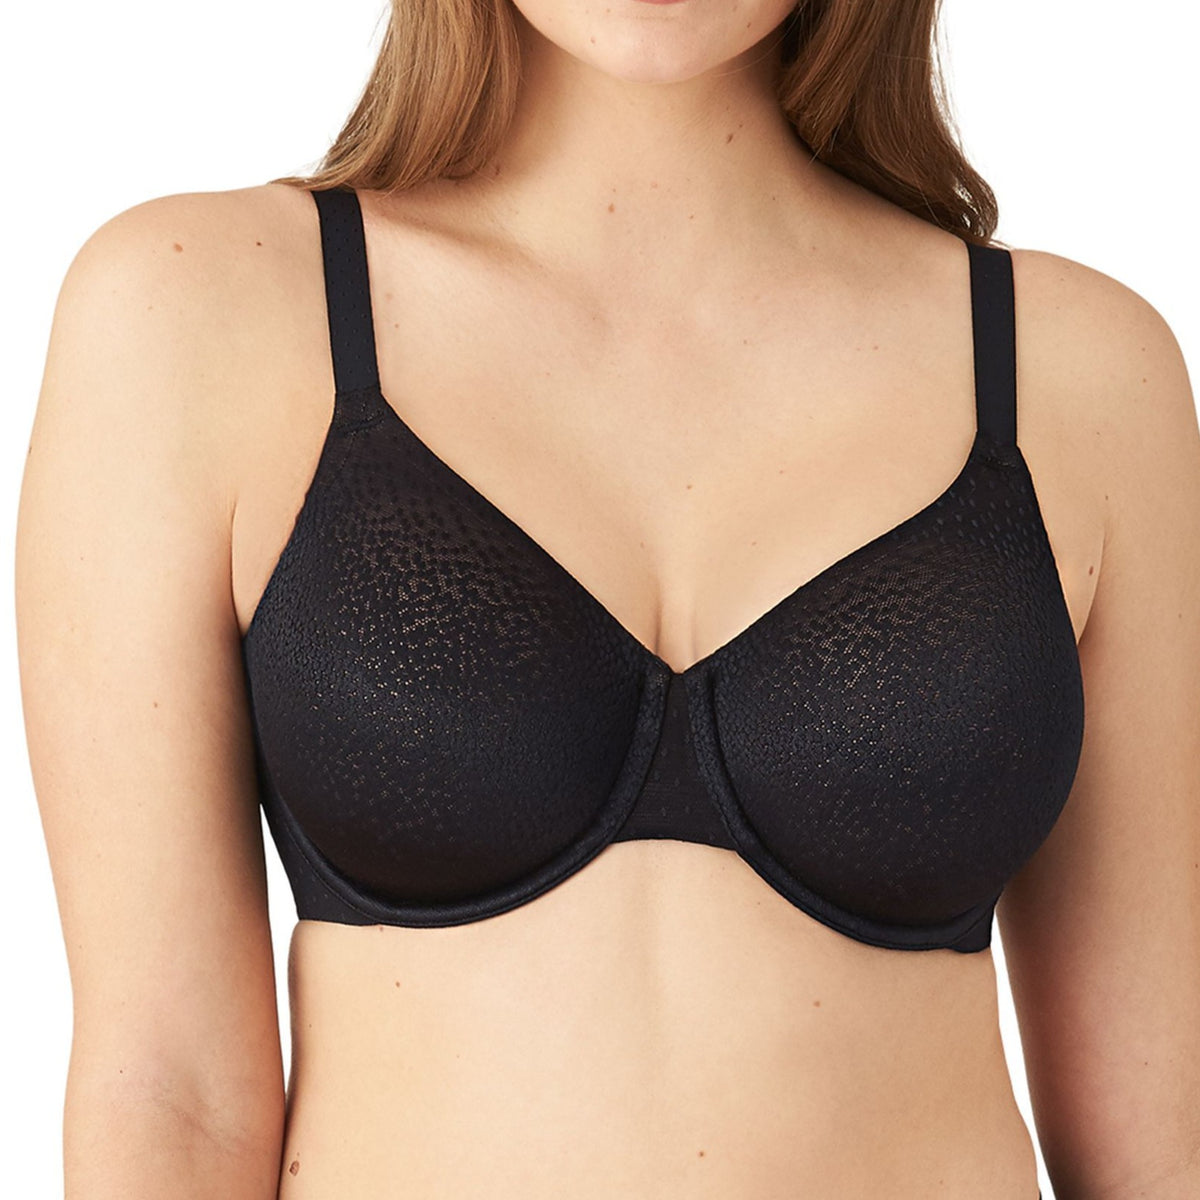 Wacoal 32DD charcoal gray full coverage bra Size undefined - $9 - From Jean